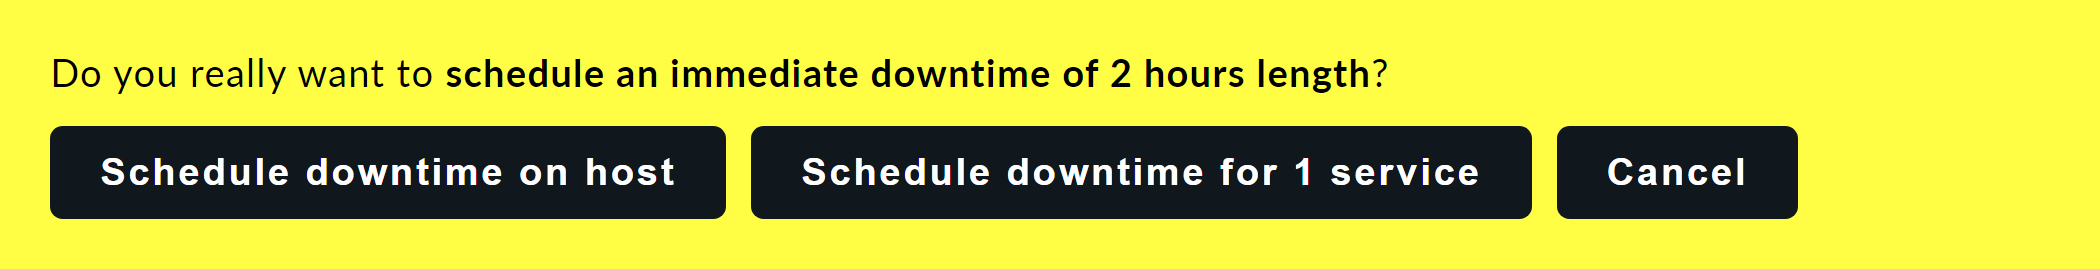 basics downtimes schedule host